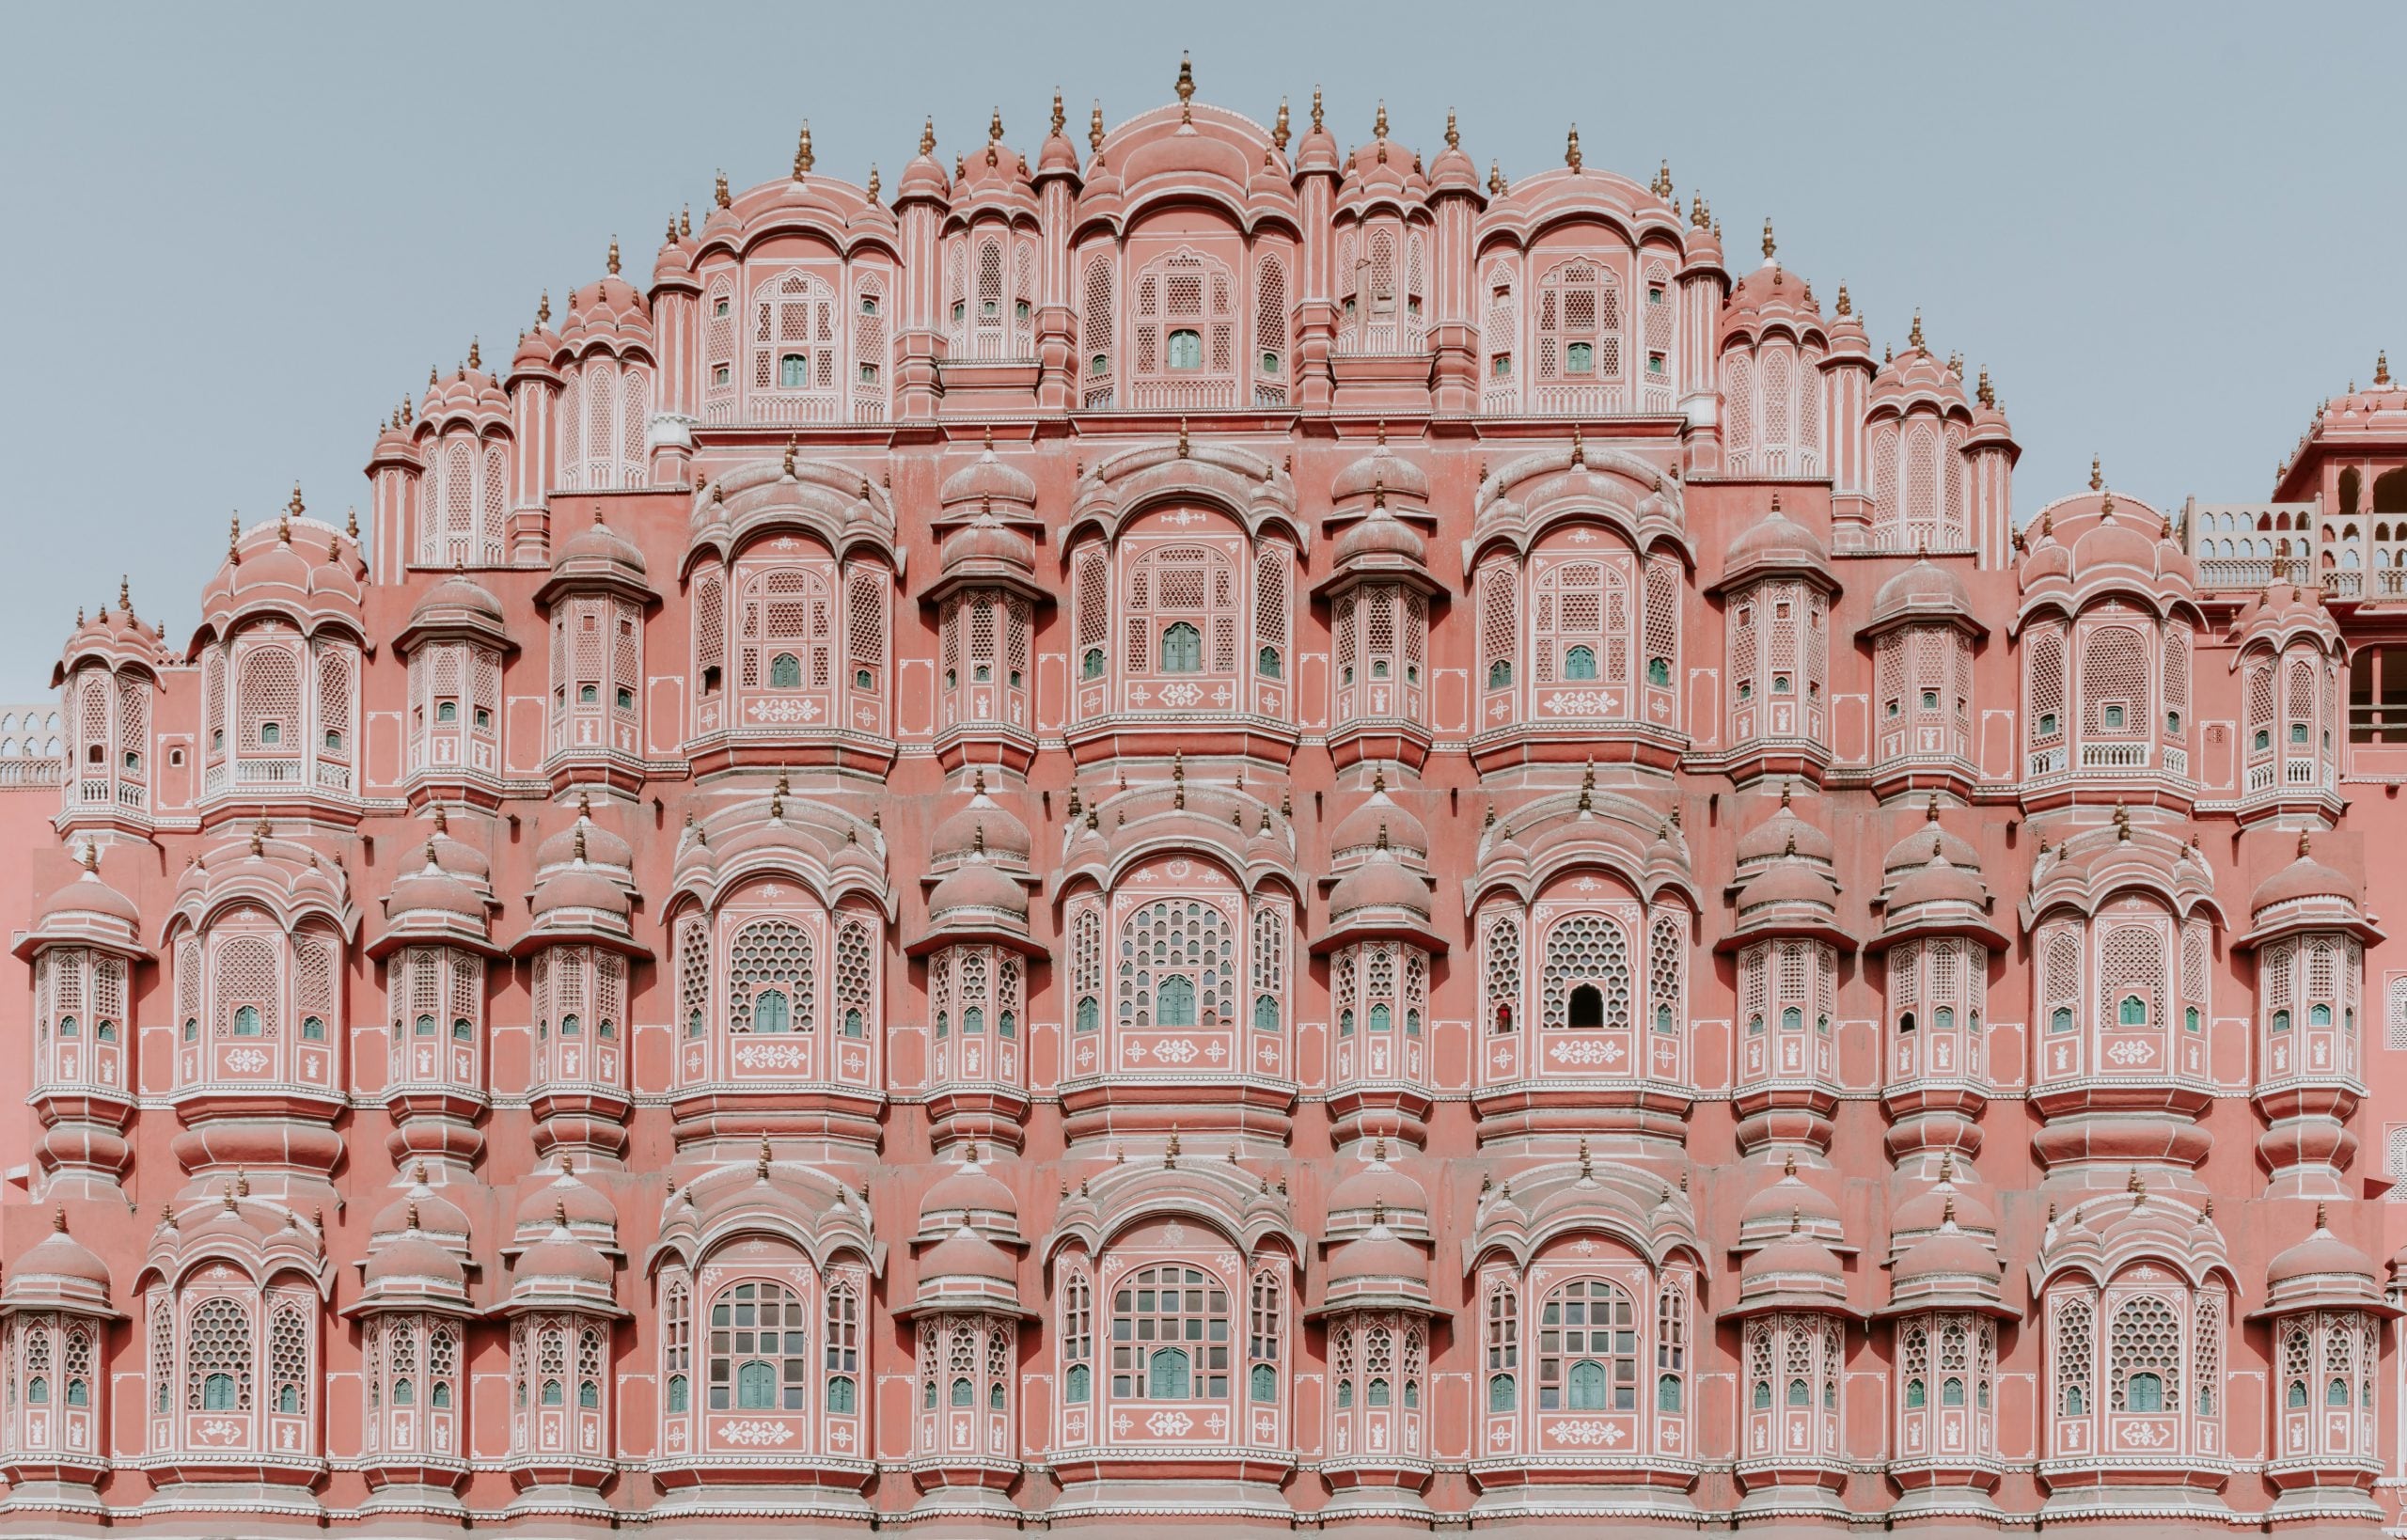 Which of these is a heritage & historical monument of Pink City – Jaipur?